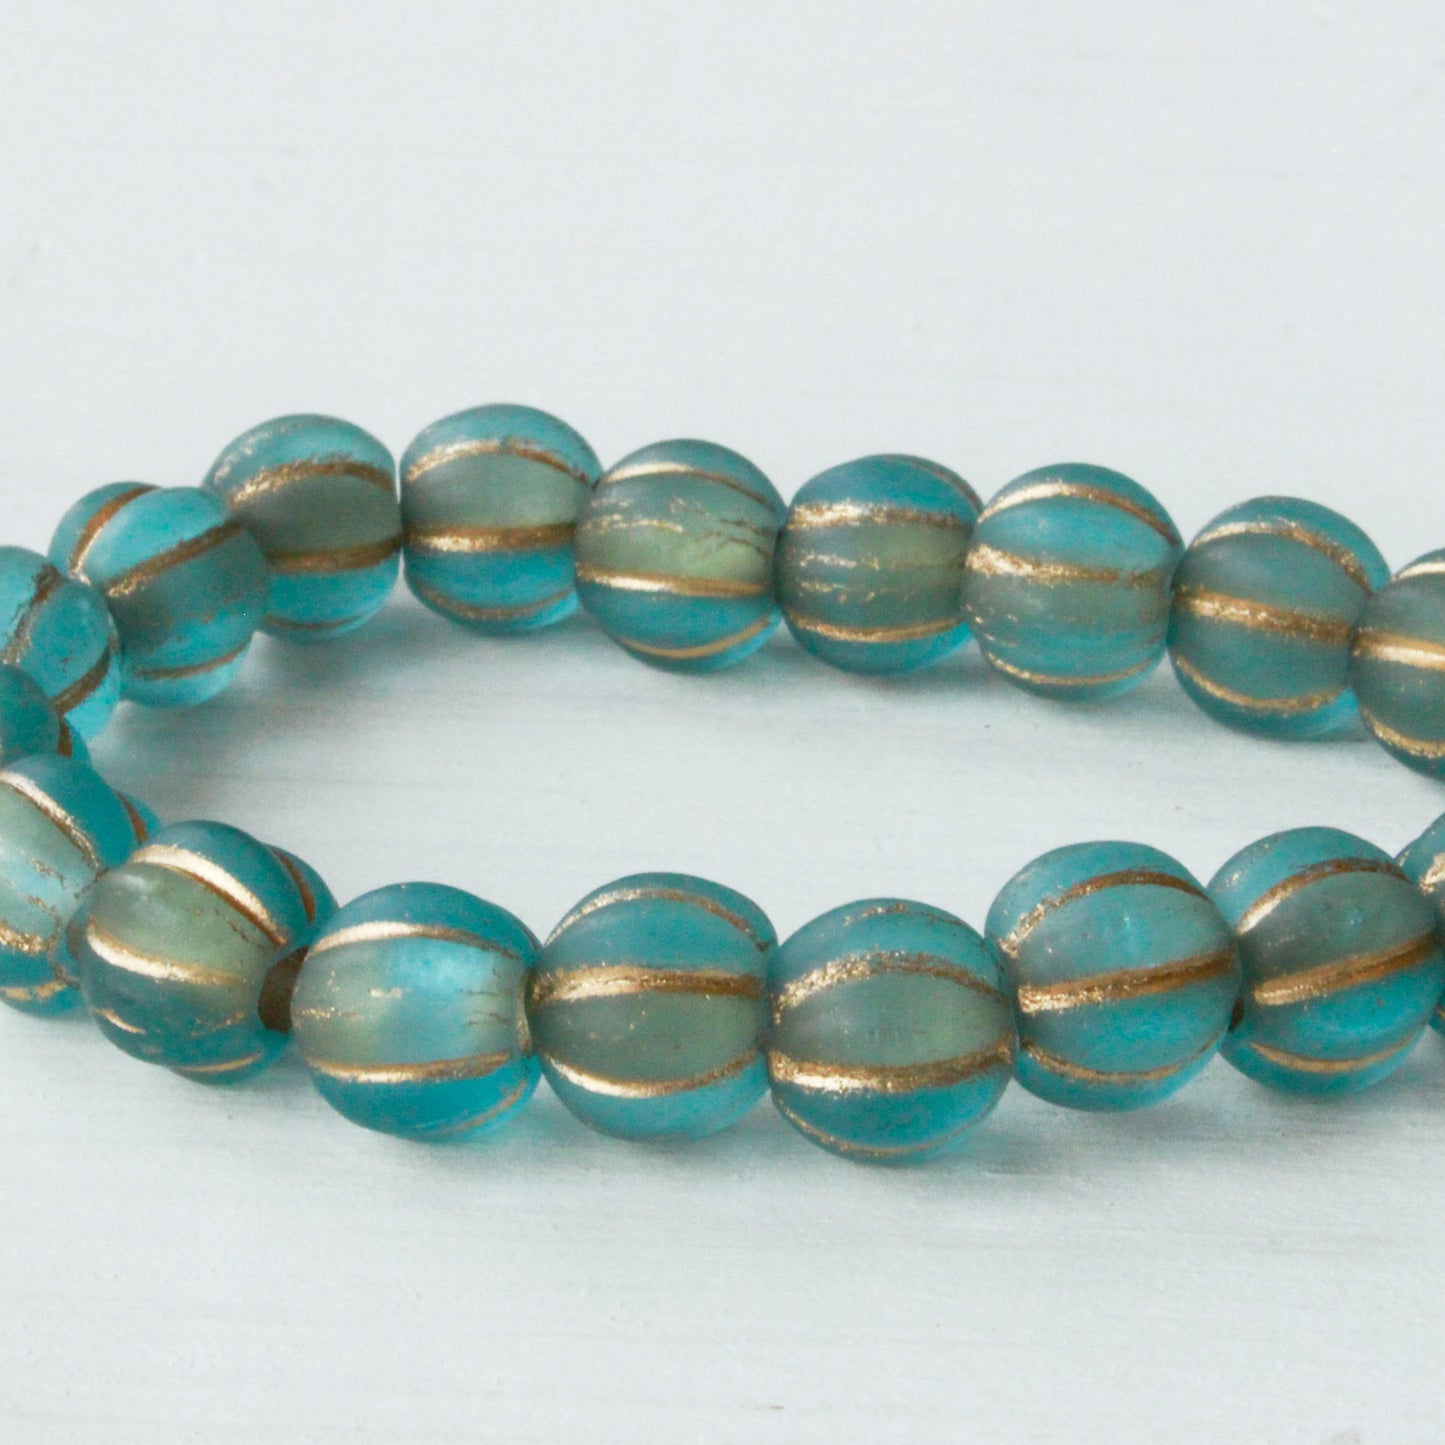 8mm Melon Beads - Seafoam with Gold Wash - 20 Beads